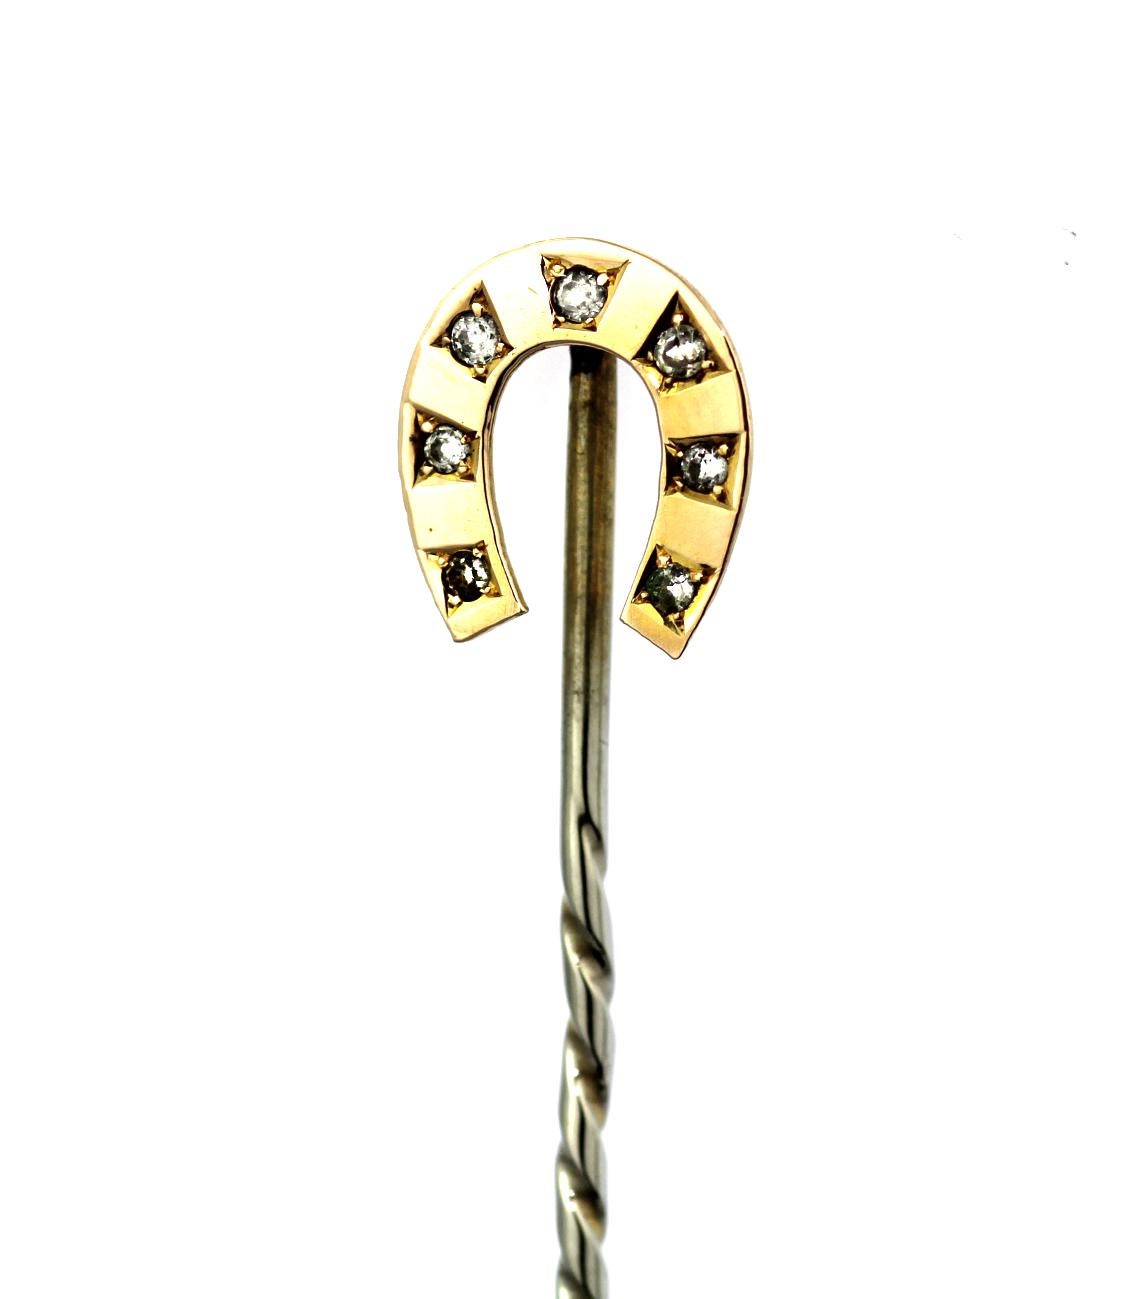 Vintage yellow gold pin, with a unique twisted handle and auspiciously lucky horseshoe design. The horseshoe, made out of 9-carat yellow gold hallmarked Chester 1918, maker mark 